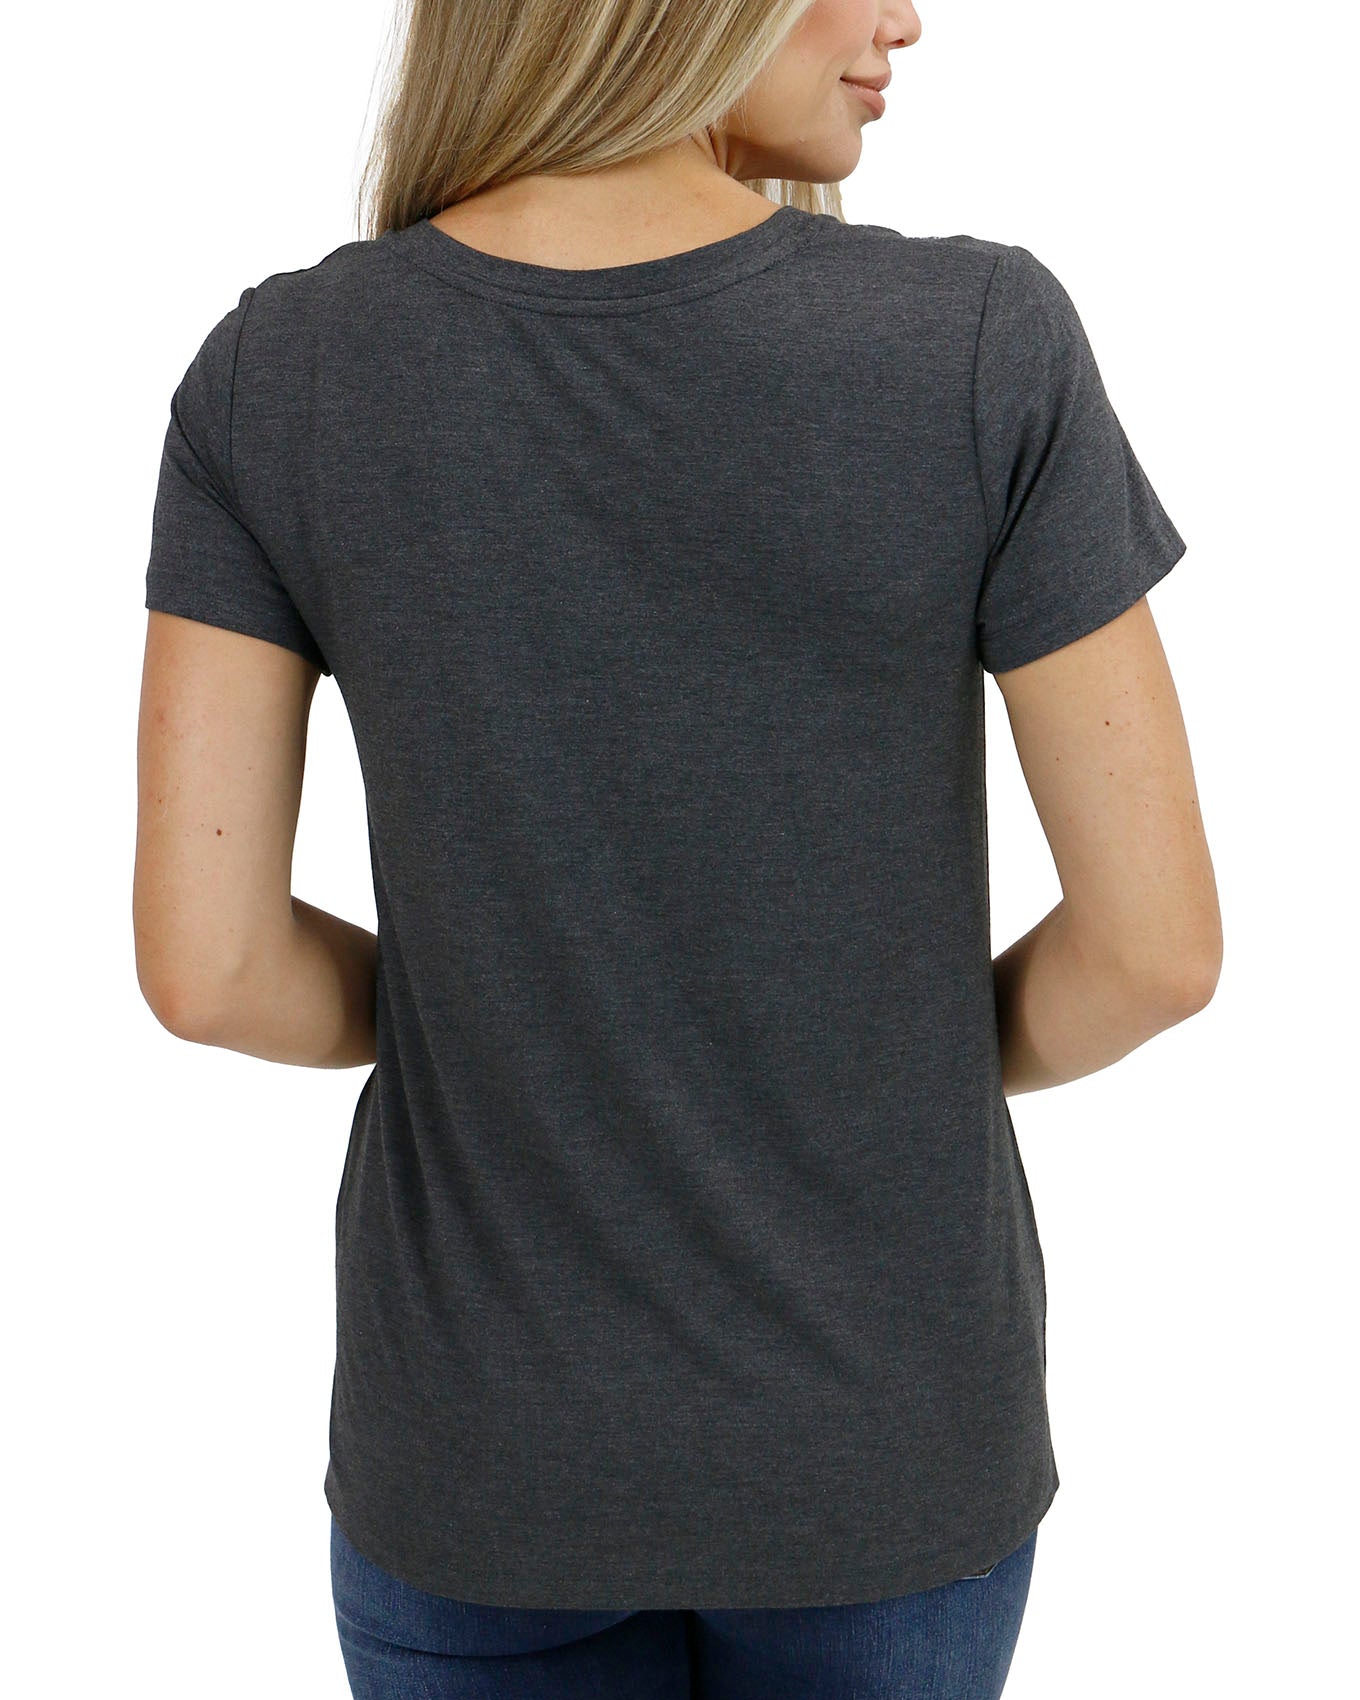 VIP Favorite Perfect Charcoal V-Neck Tee - Grace and Lace